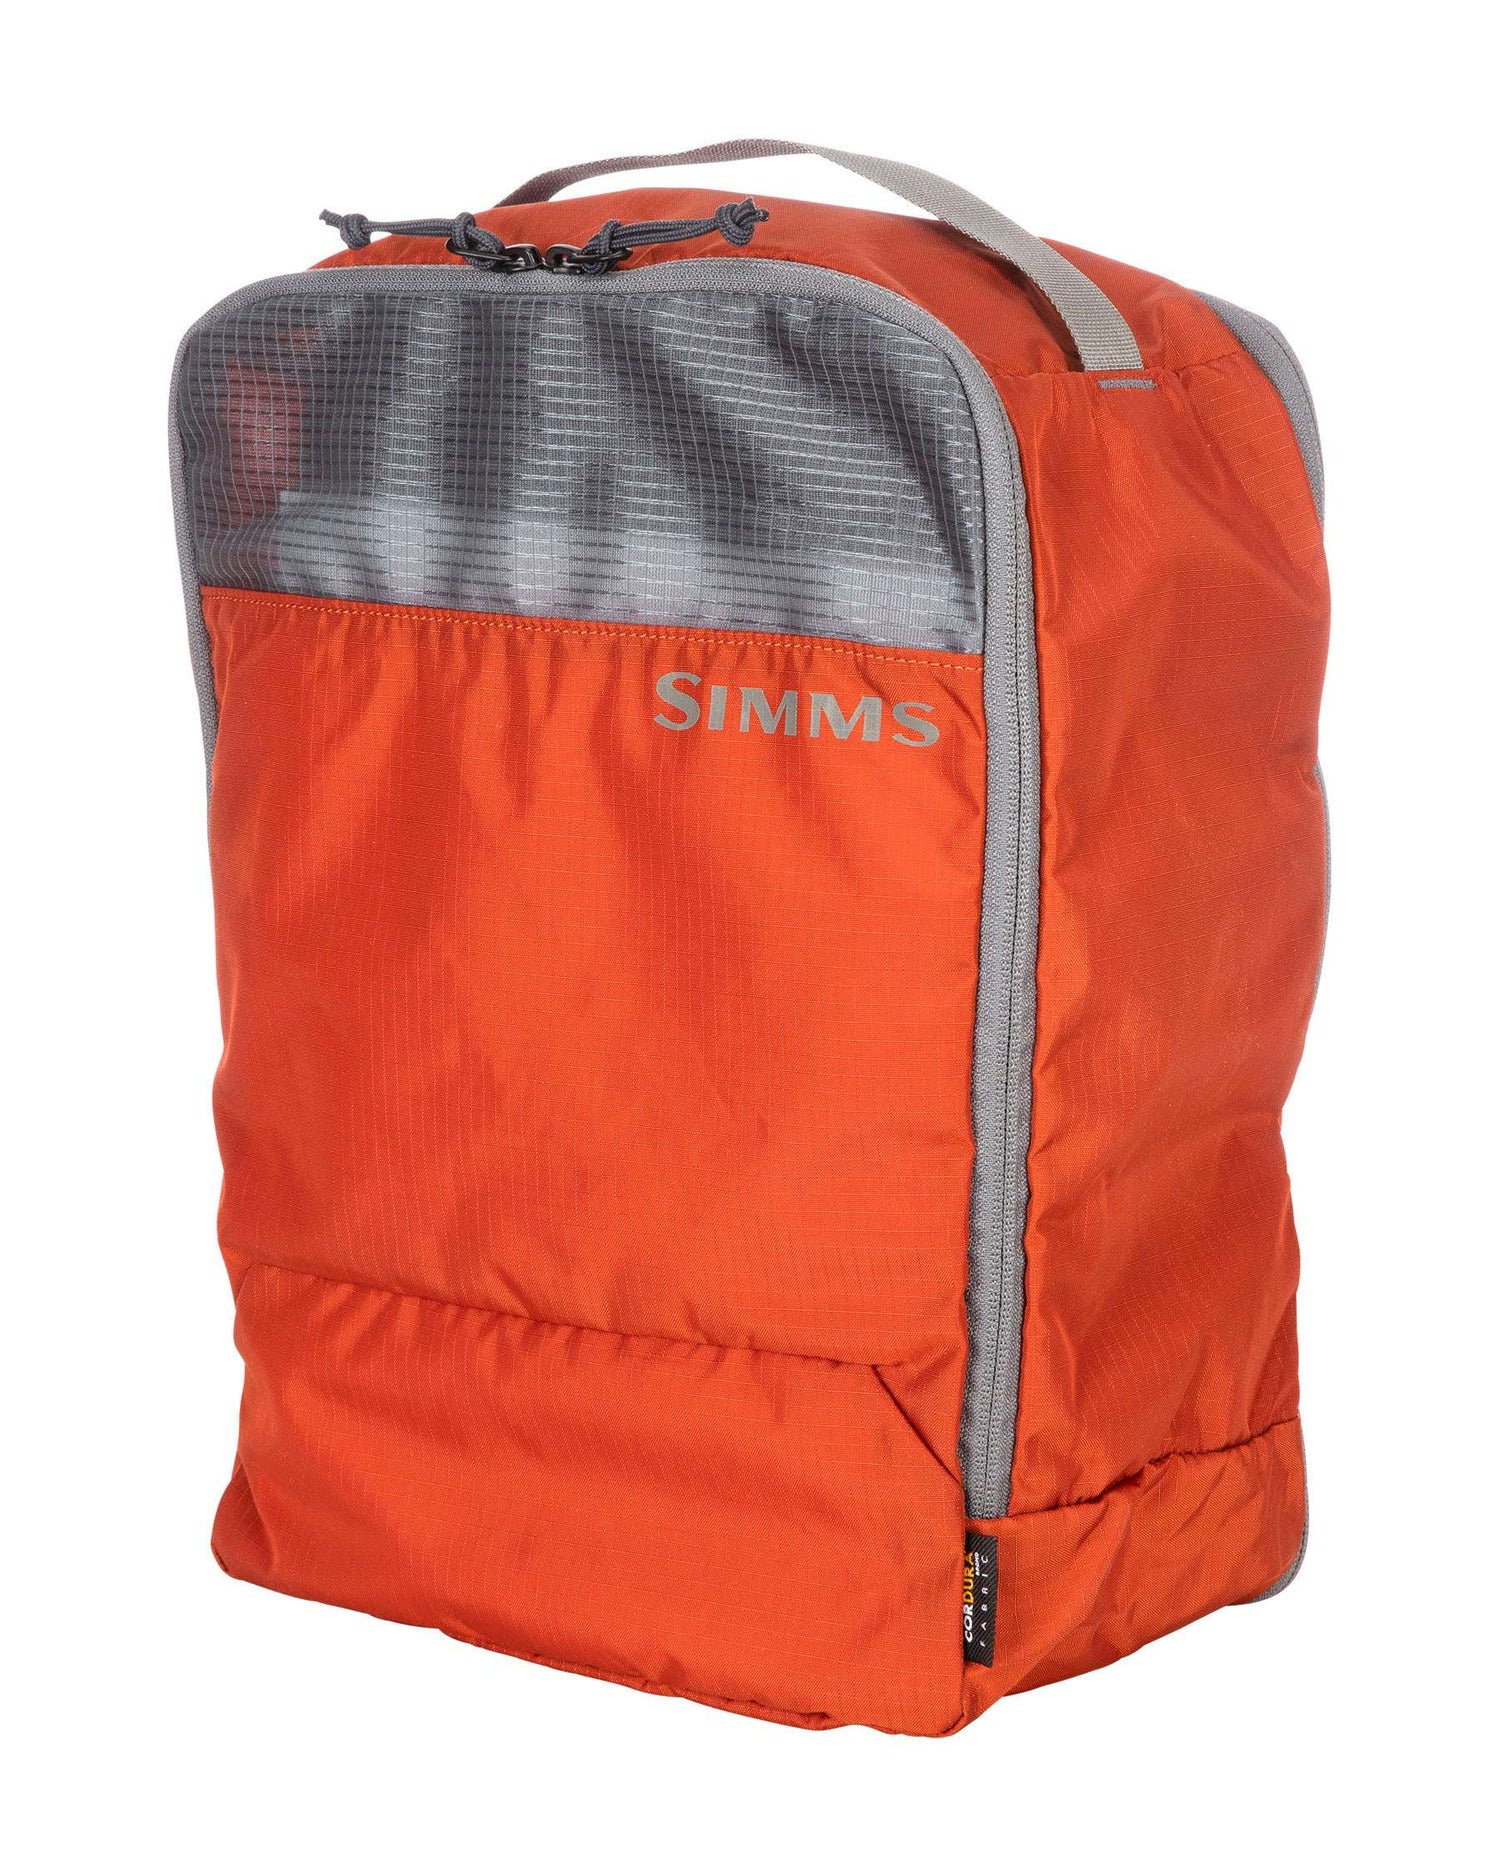 GTS Packing Pouches - 3-Pack - Simms Orange